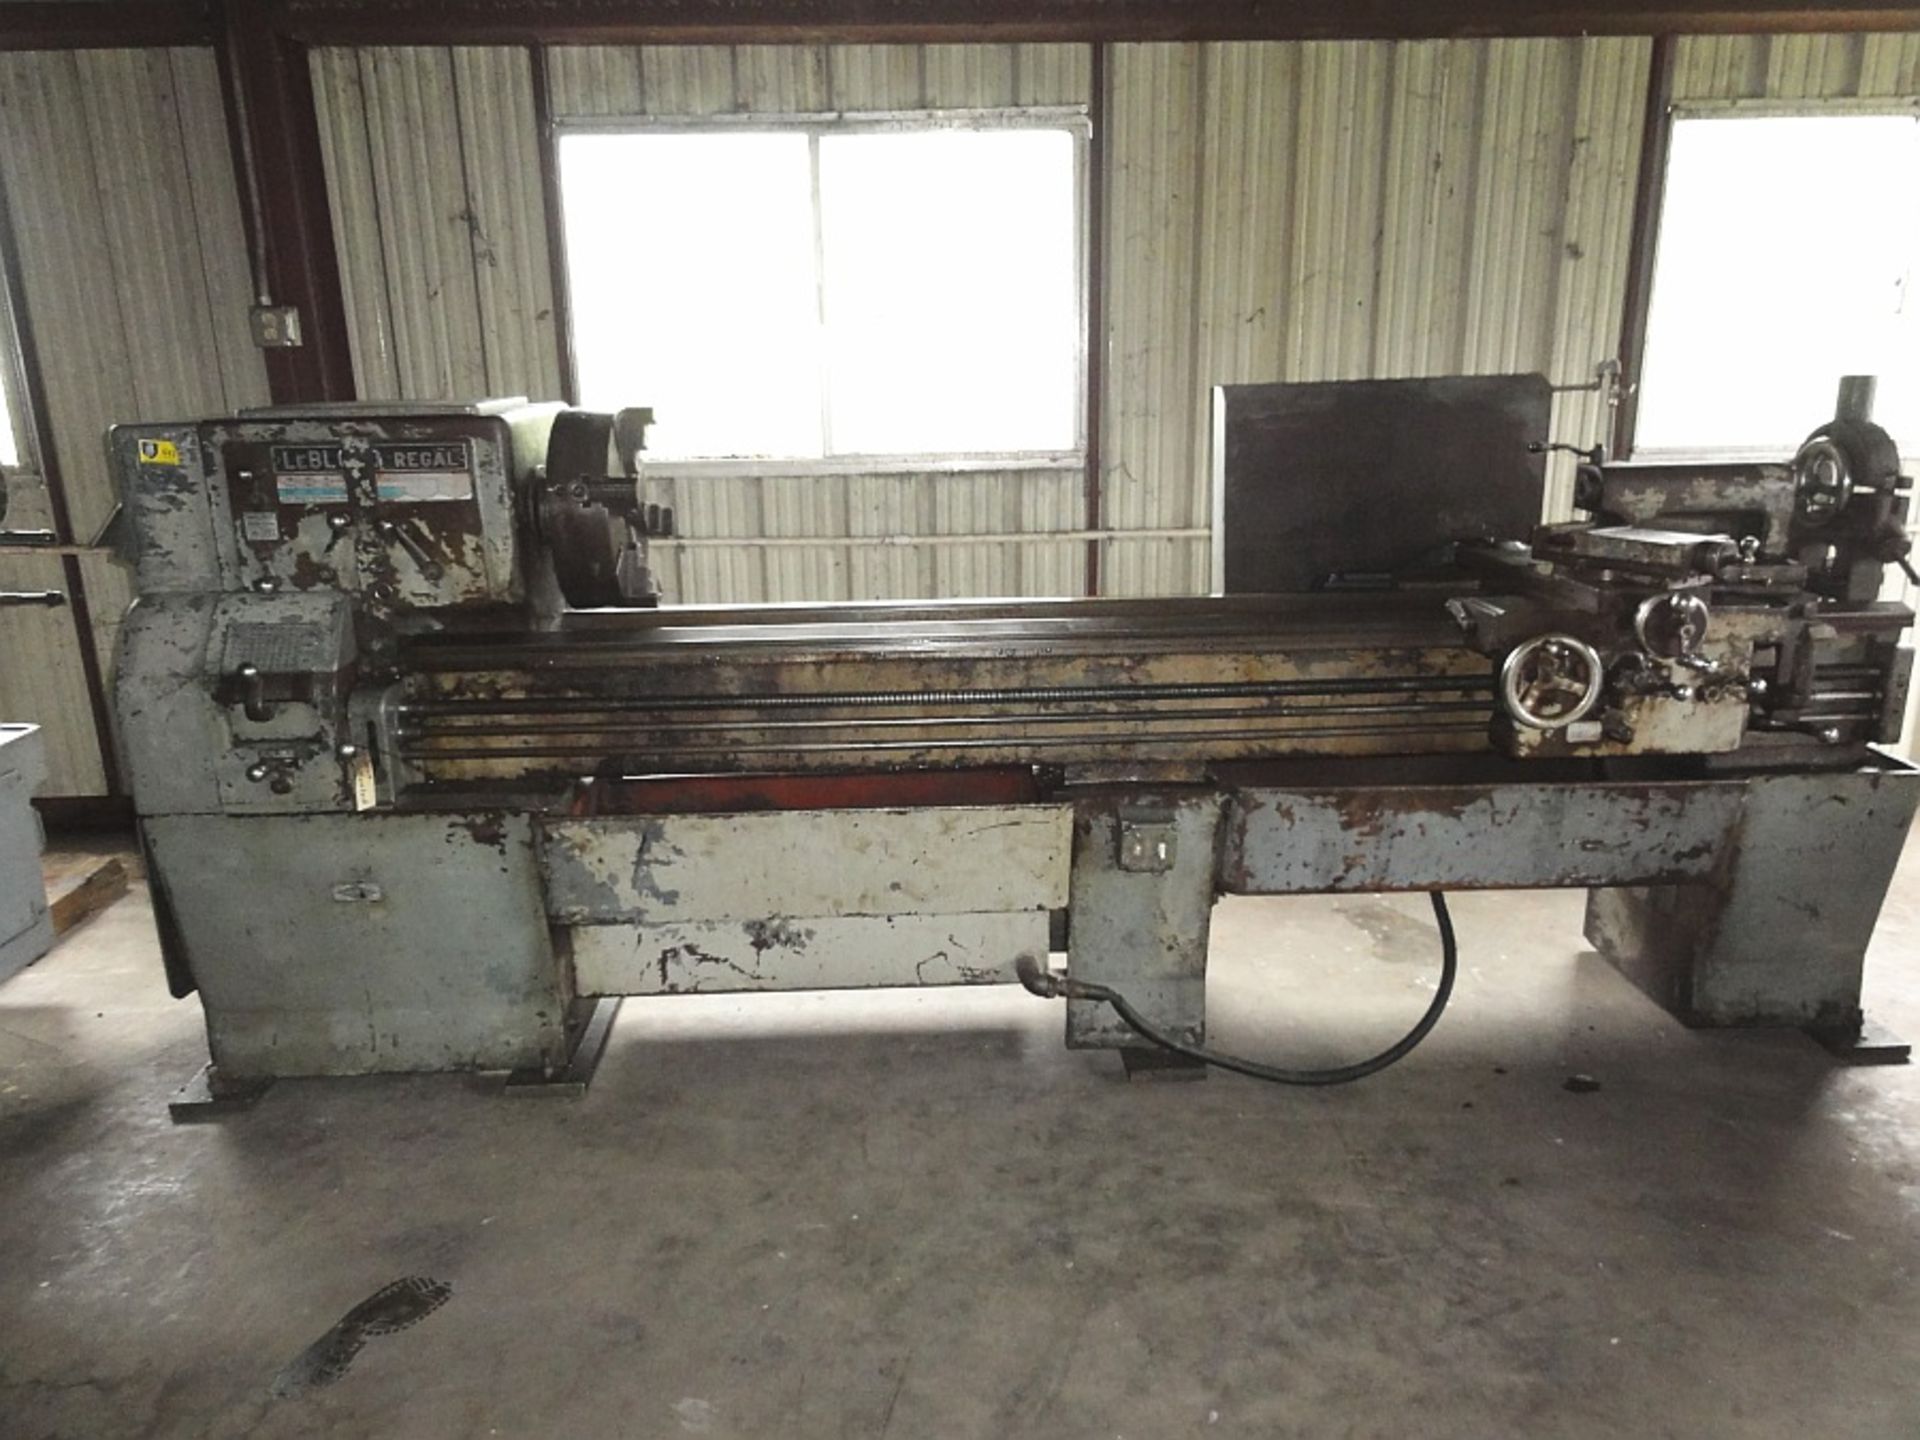 LeBlonde Engine Lathe, 17" Swing x 80" Centers, 102" Bed, 15" 4-jaw Chuck, Taper Attachment,